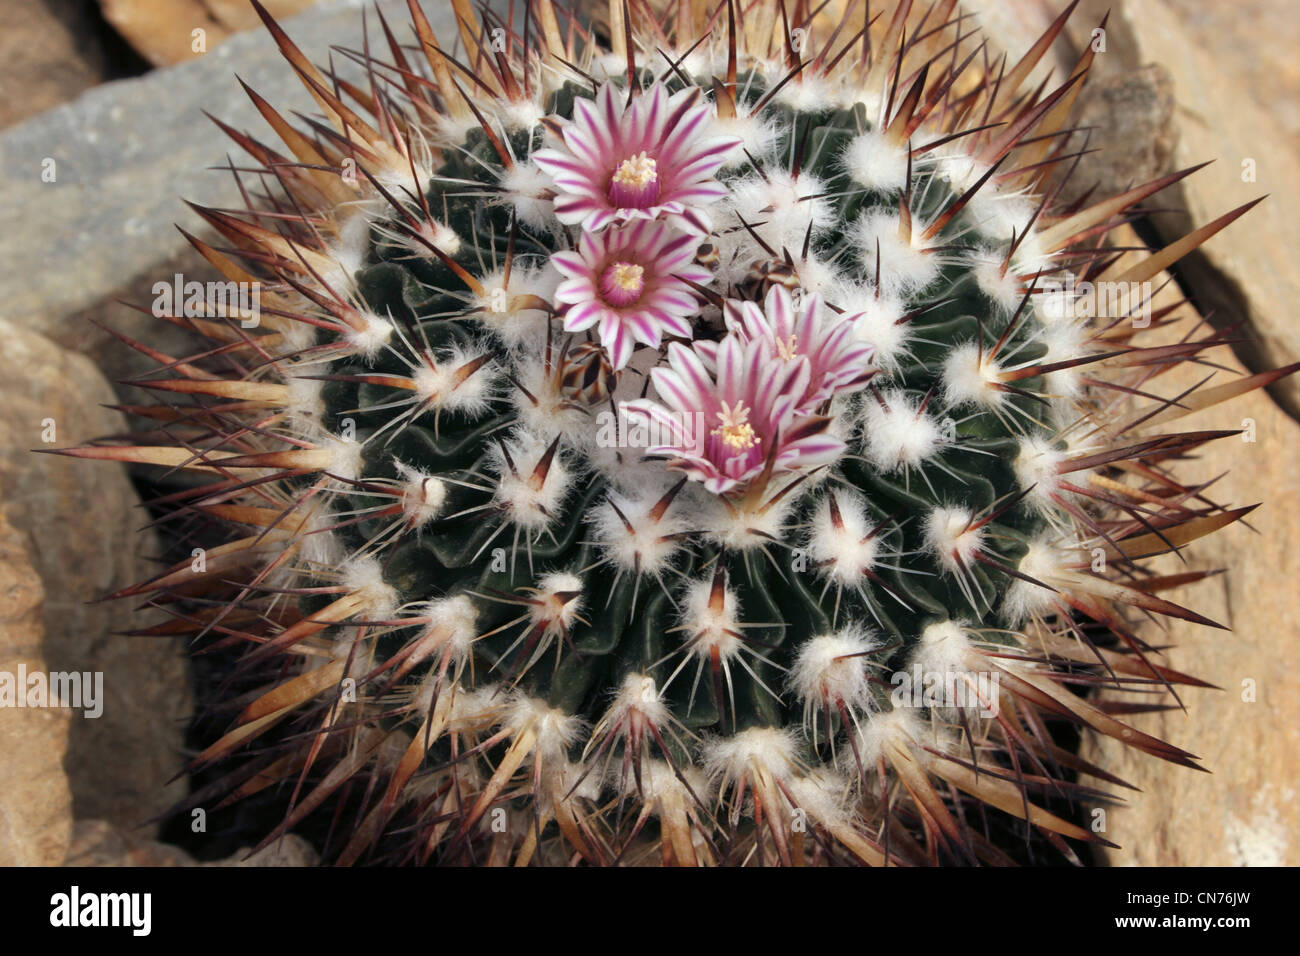 Cactus (Stenocactus heteracanthus) grown from seed from Pachuquilla, Hidalgo, Mexico. Stock Photo